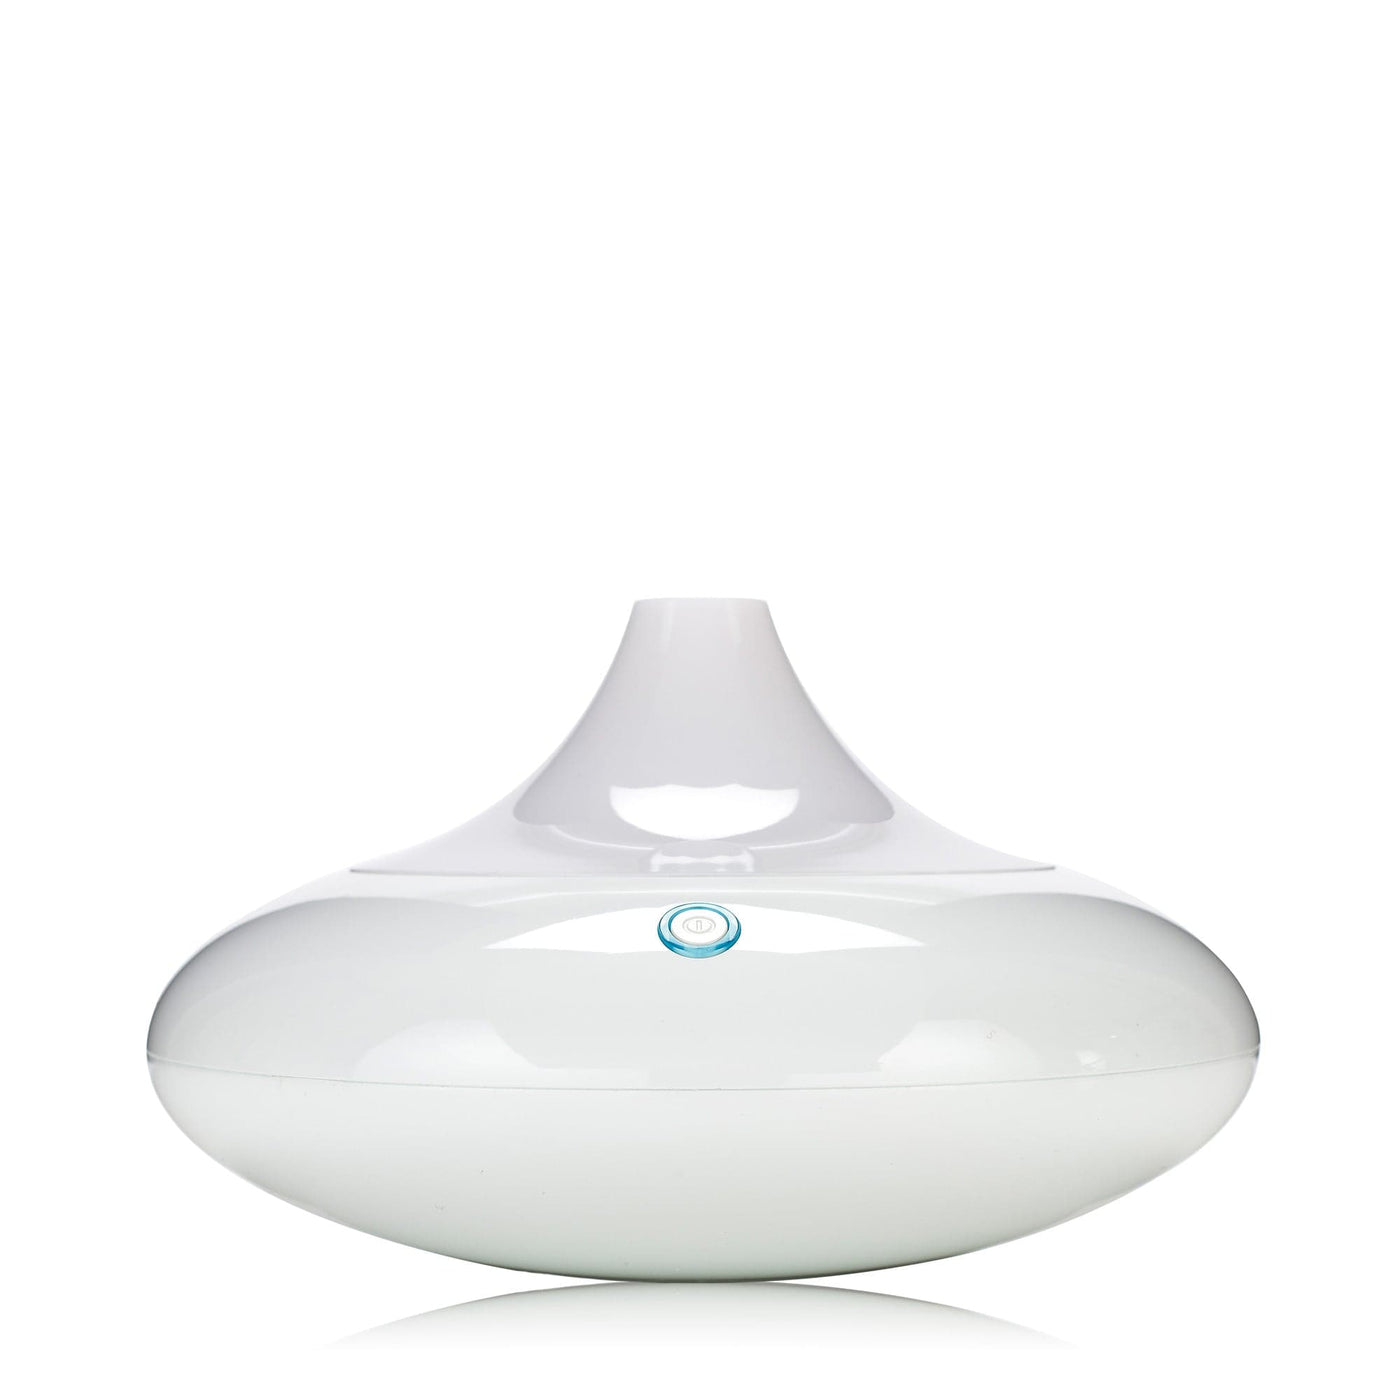 Neal's Yard Remedies Soto Aroma Diffuser